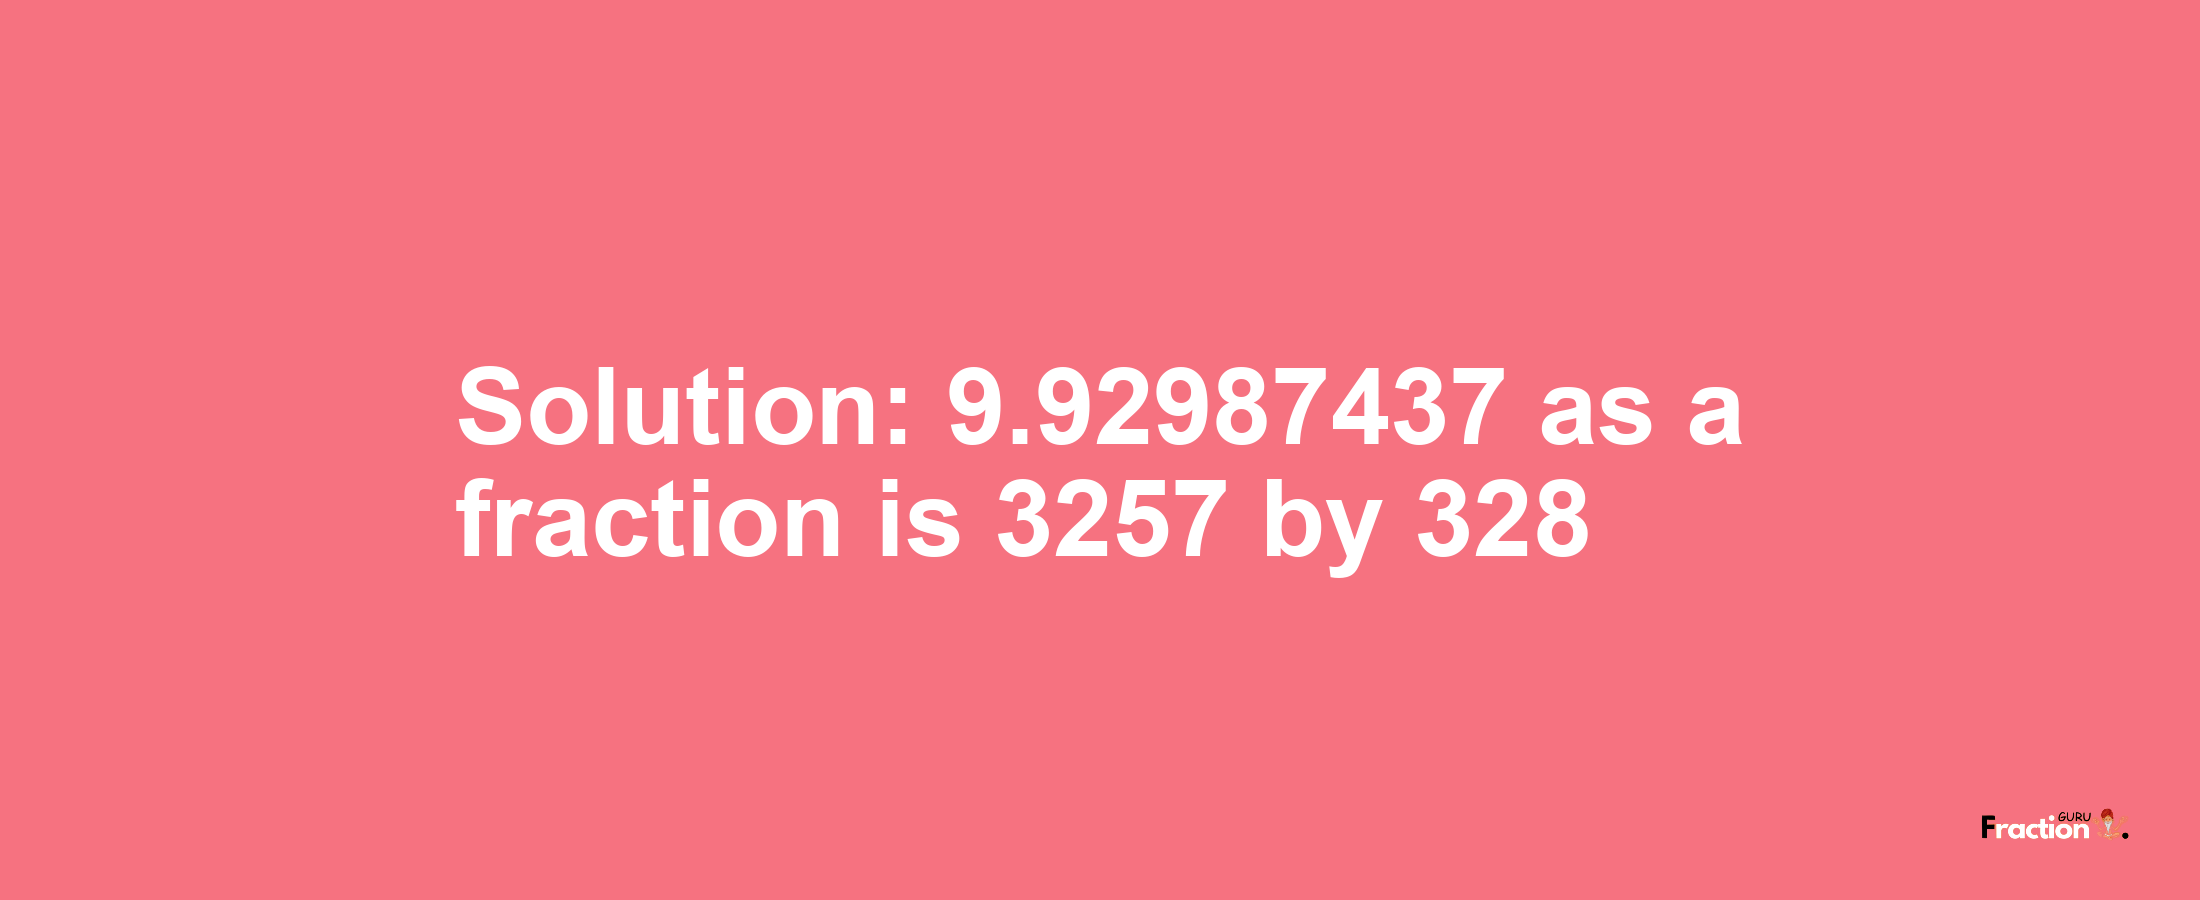 Solution:9.92987437 as a fraction is 3257/328